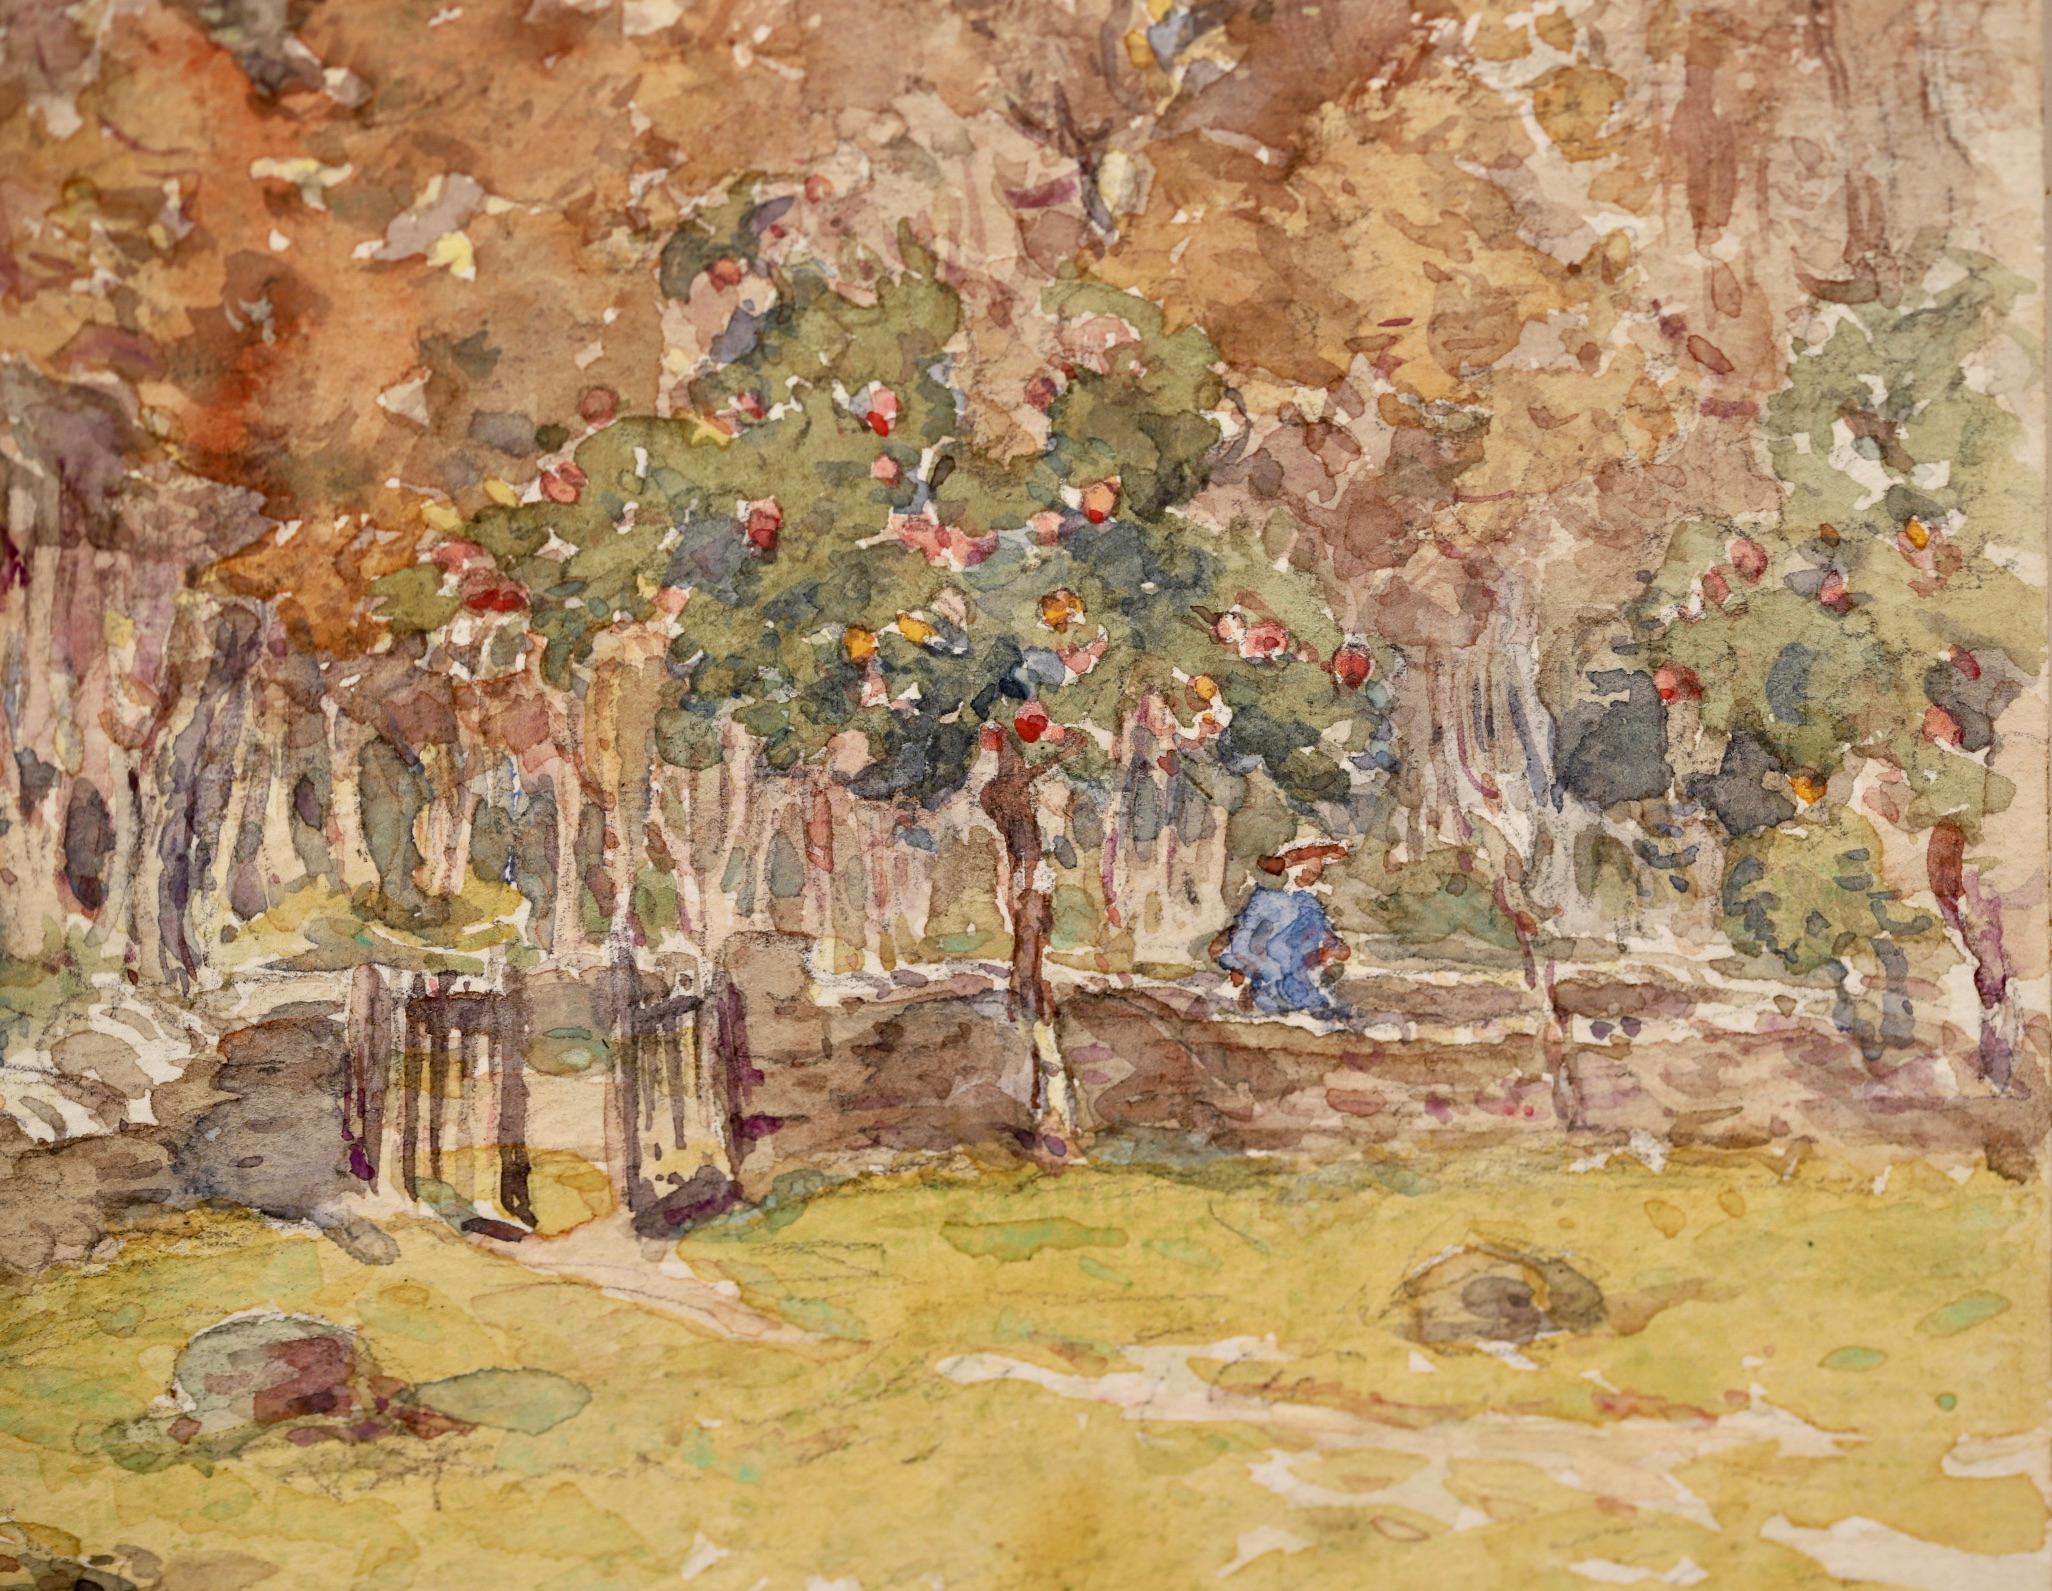 A beautiful and delicate watercolour on paper circa 1910 by French impressionist painter Henri Duhem. The work depicts a woman in a blue dress in an orchard in autumn. The trees in the foreground are covered in red fruits and the leaves on the trees